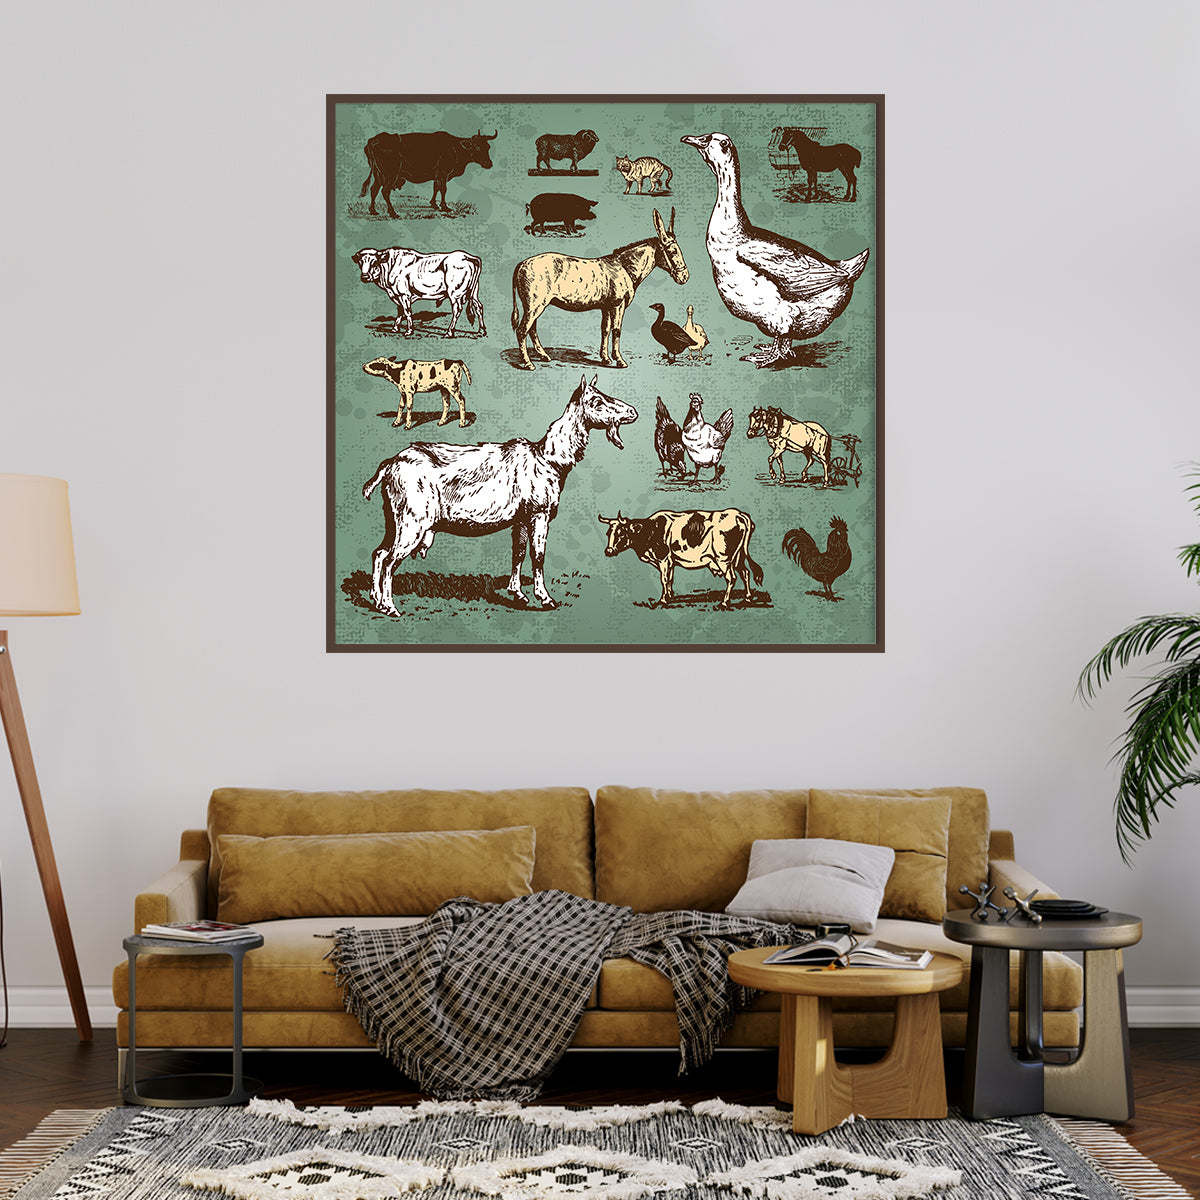 Vintage Farm Animals Cool Posters For Room-Square Posters NOT FRAMED-CetArt-8″x8″ inches-CetArt